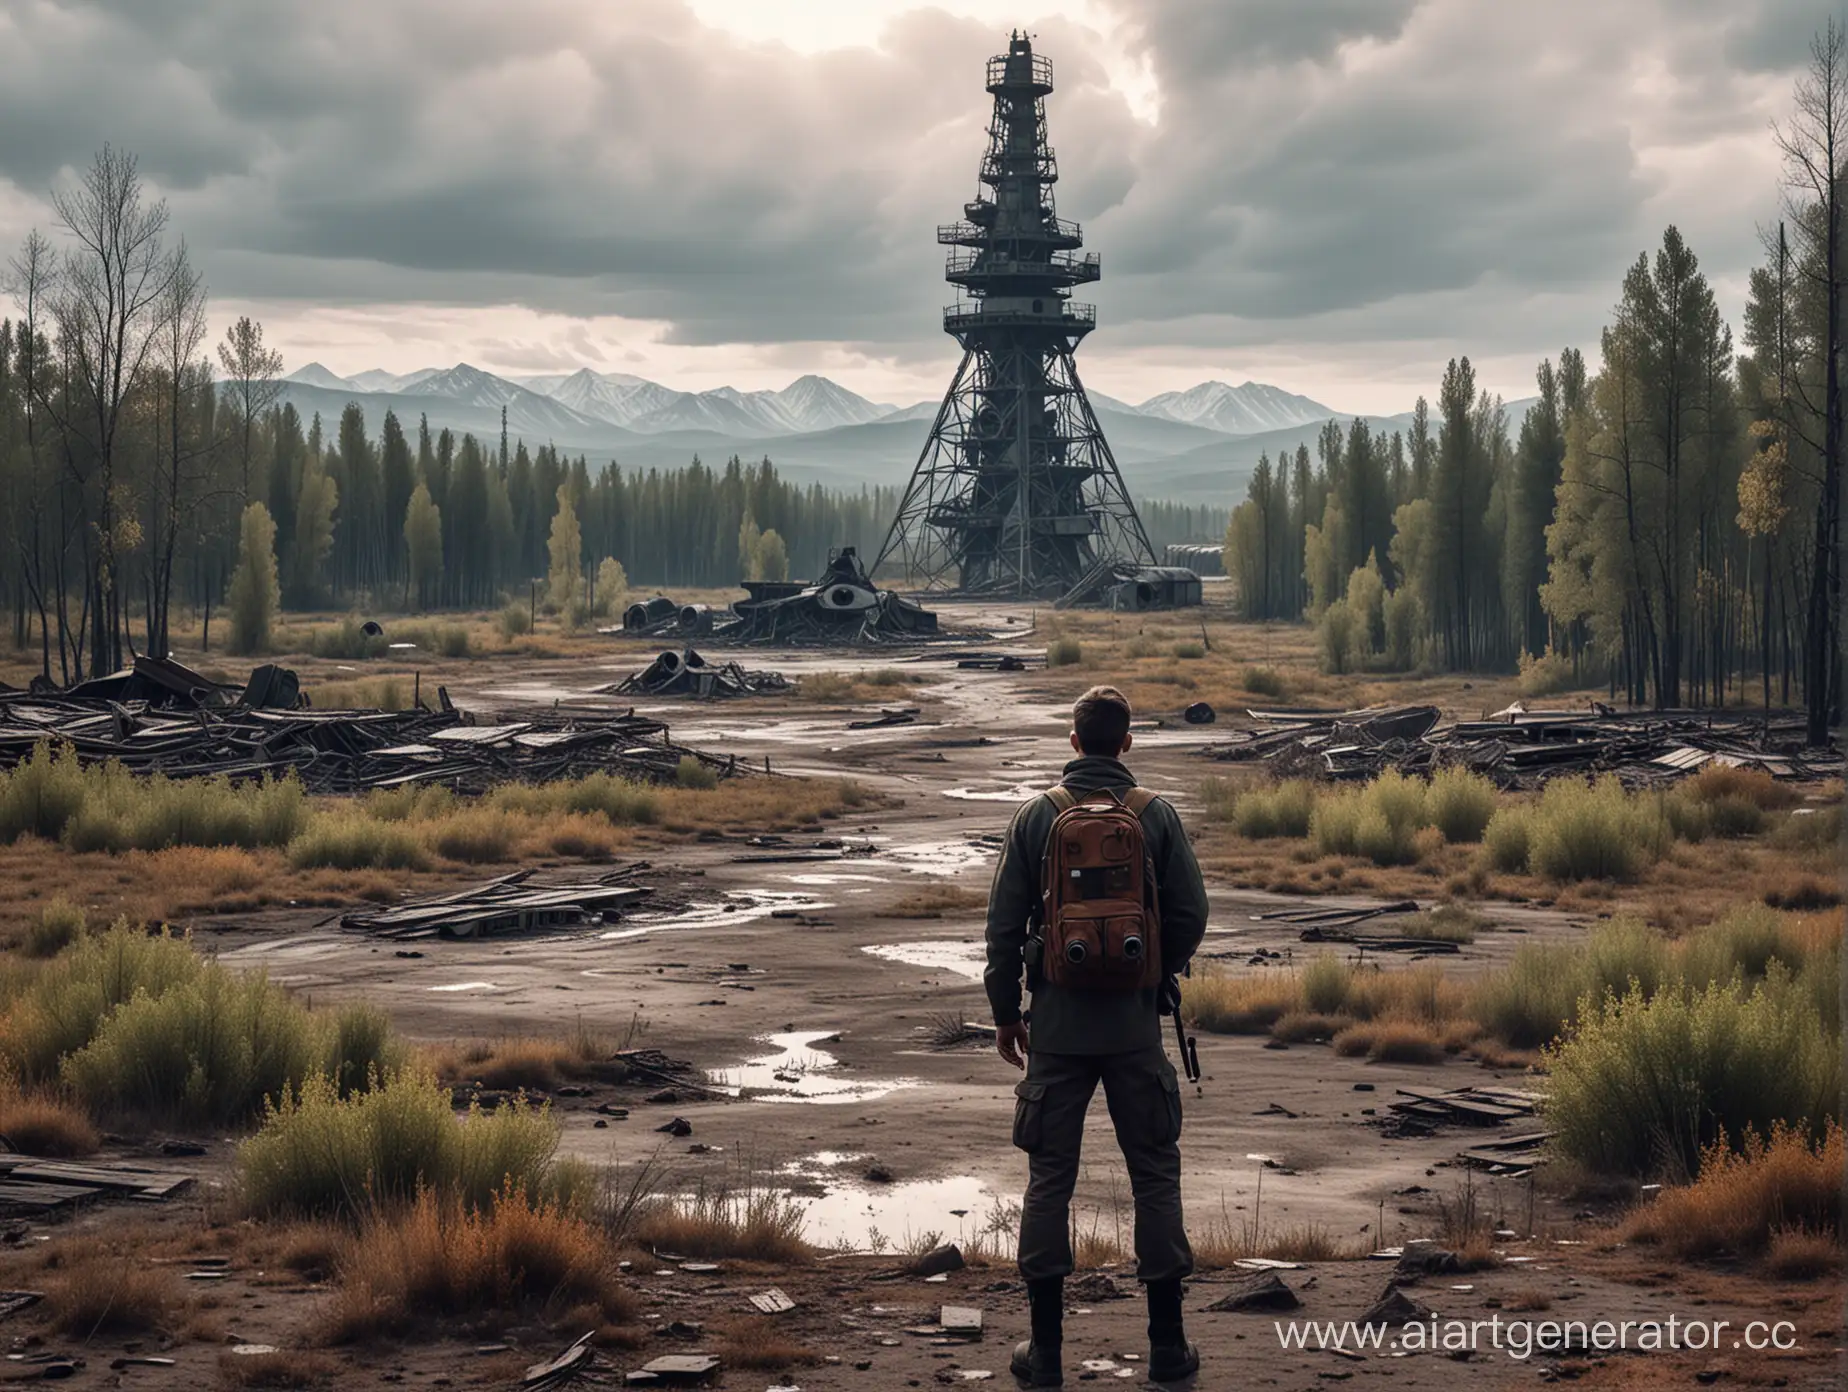 Blogger-Explores-Abandoned-Soviet-Cosmodrome-in-Horror-Game-Poster